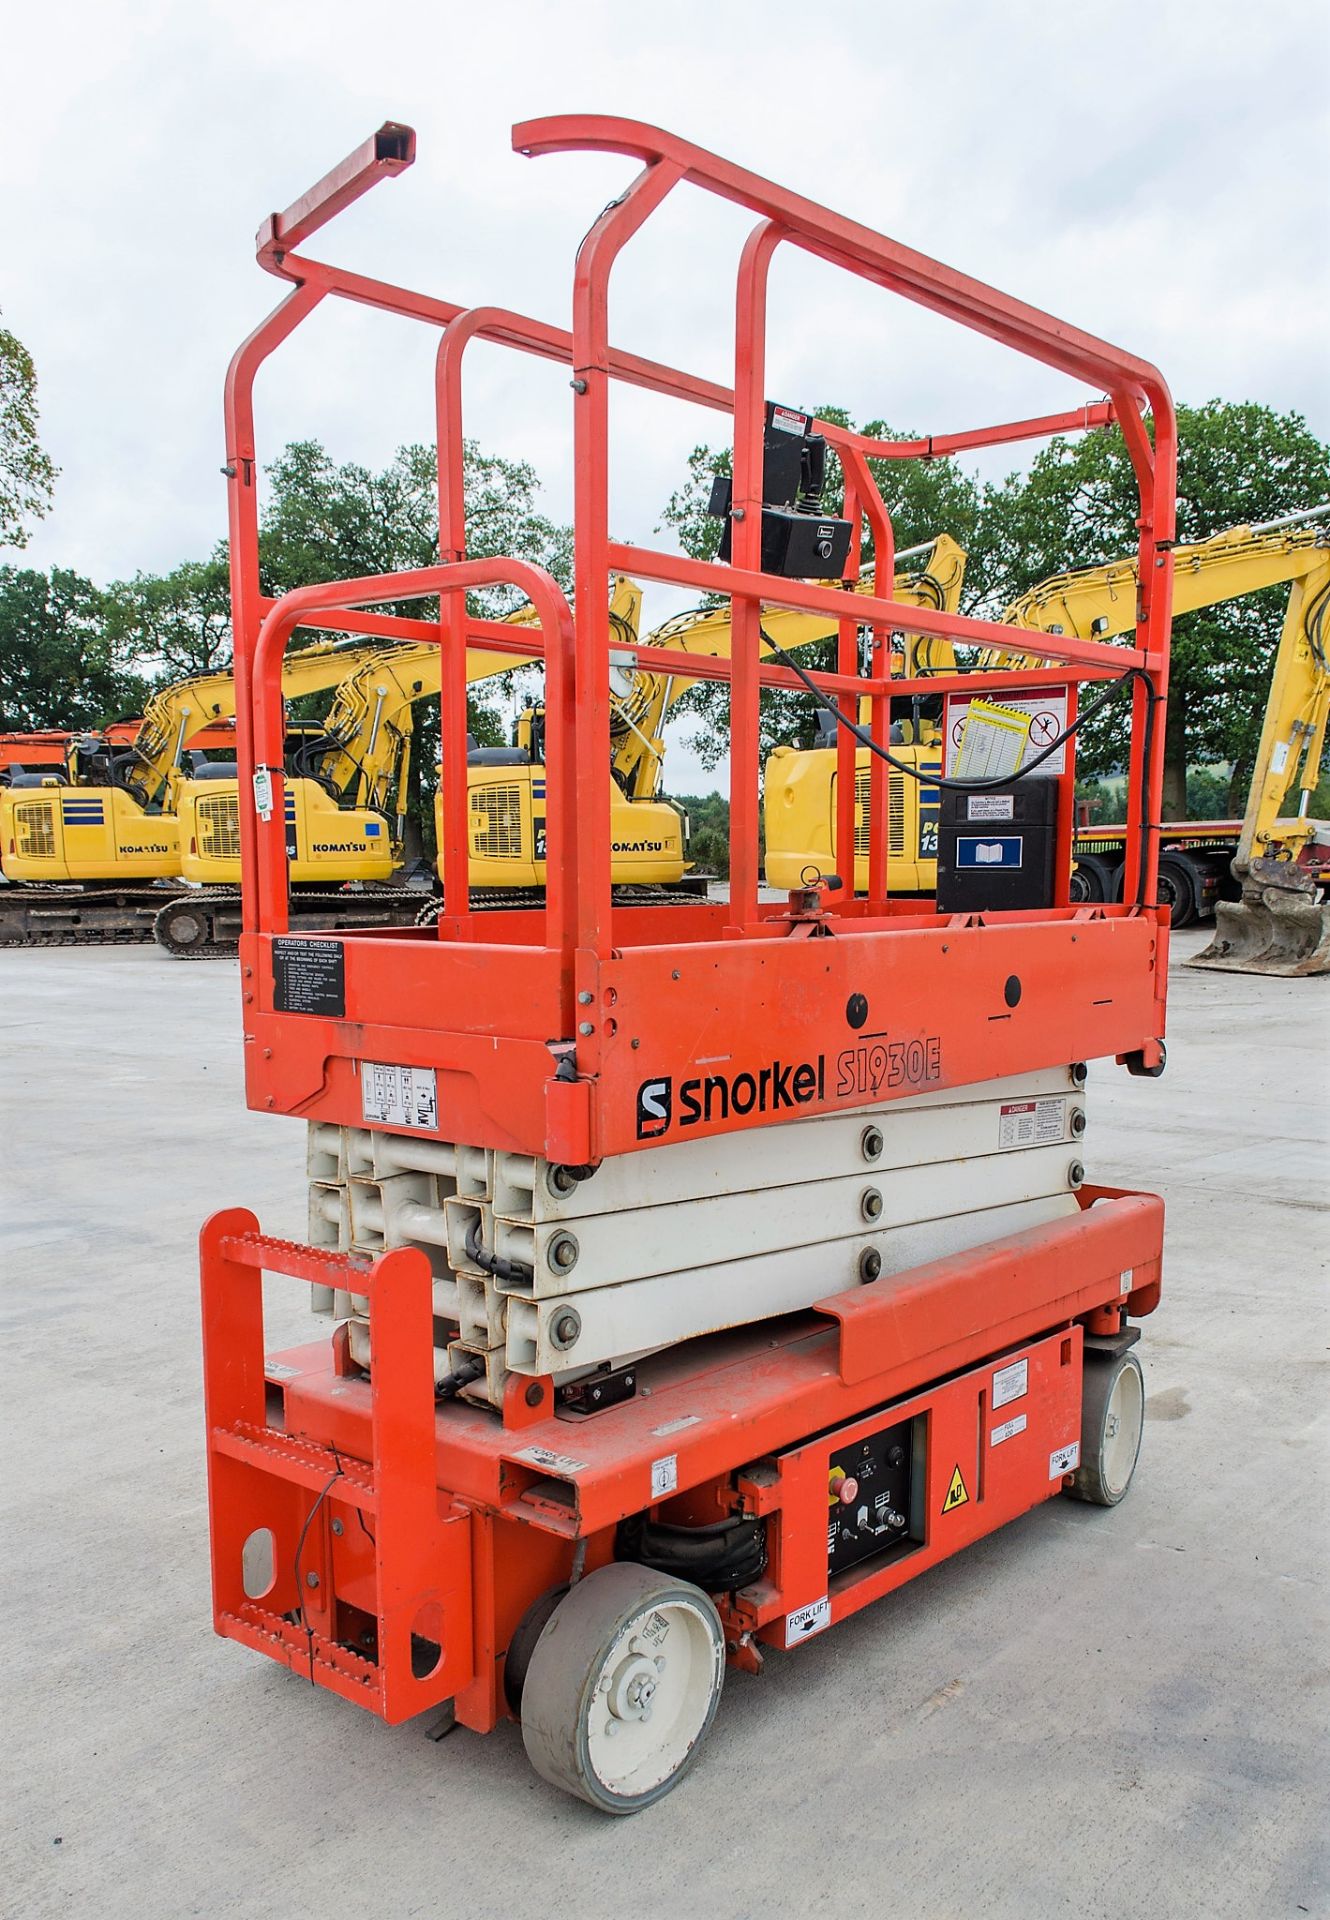 Snorkel S1930E battery electric scissor lift access platform Year: 2012 S/N: 000850 Recorded